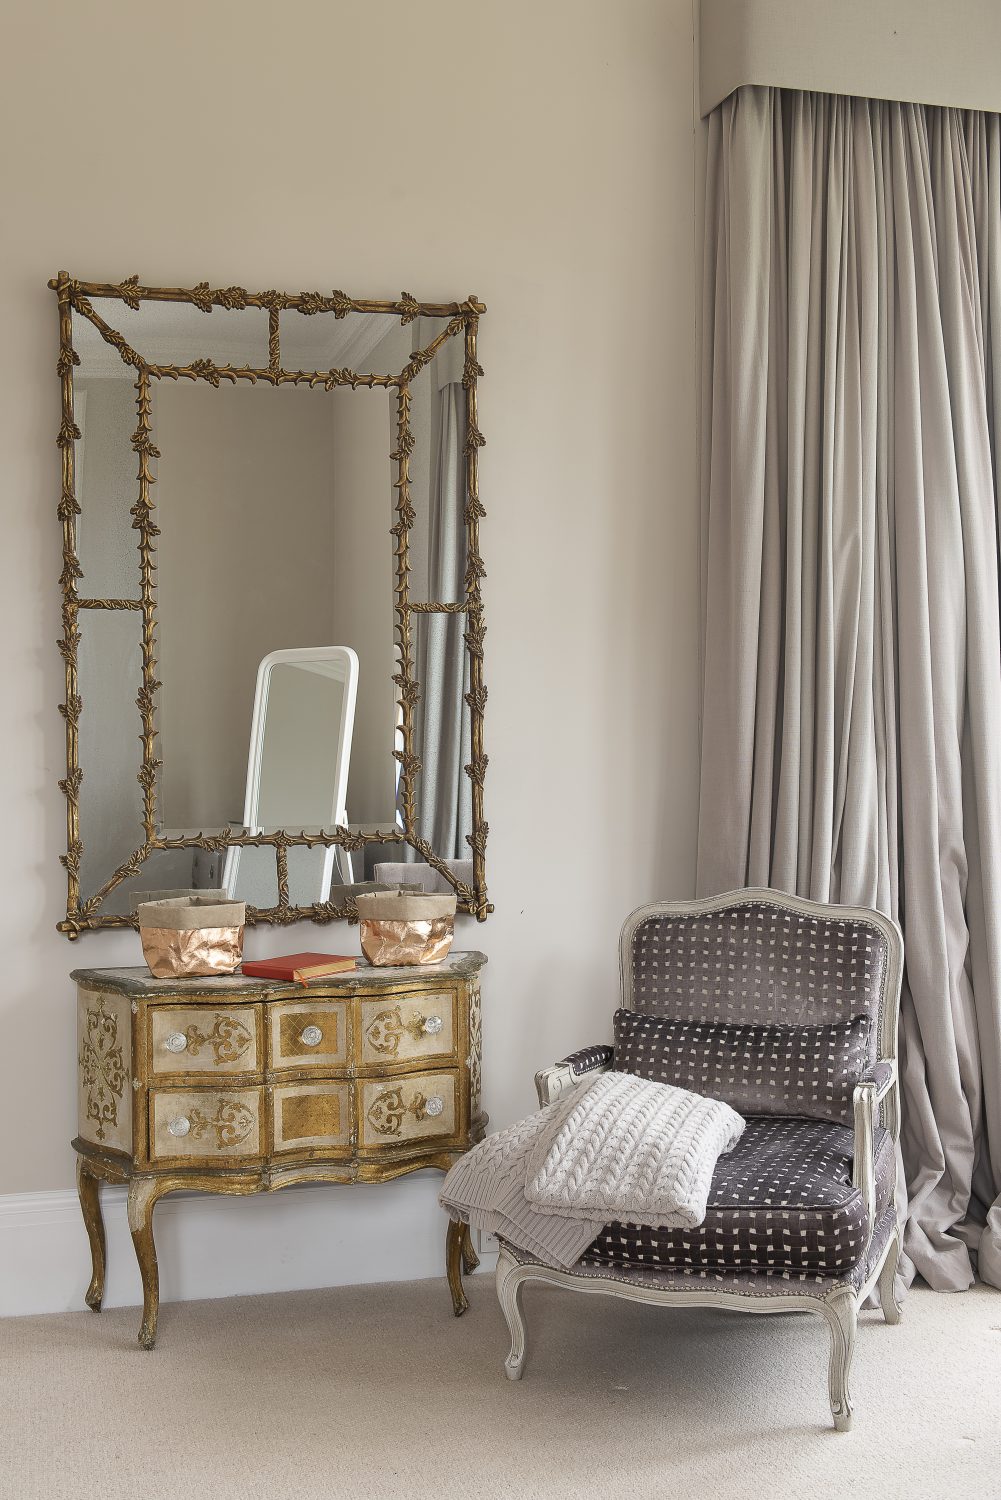 Like the rest of the house, the neutral tones used to decorate the bedrooms are the perfect backdrop for Jaime and Justin’s eclectic collection of furniture and artworks